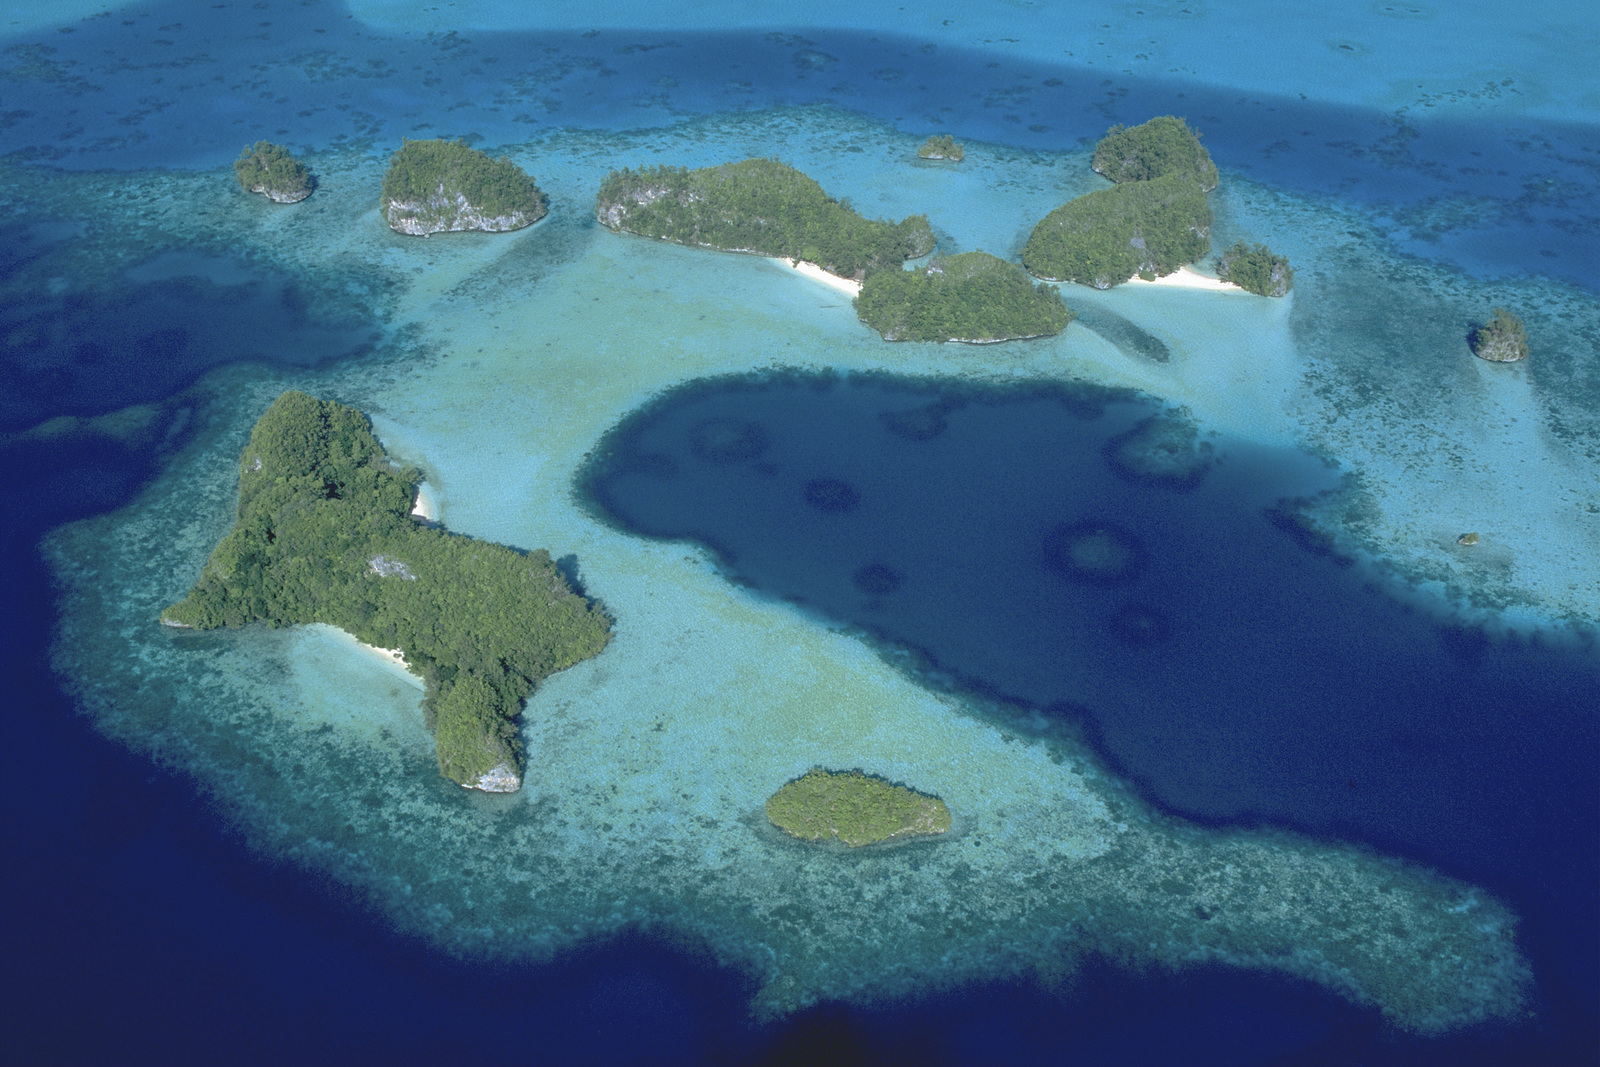 (INTERNAL RIGHTS ONLY) Aerial view of Kmekumer, Rock Islands, Republic of Palau, Palau, Asia Pacific. Photo © Jez O'Hare